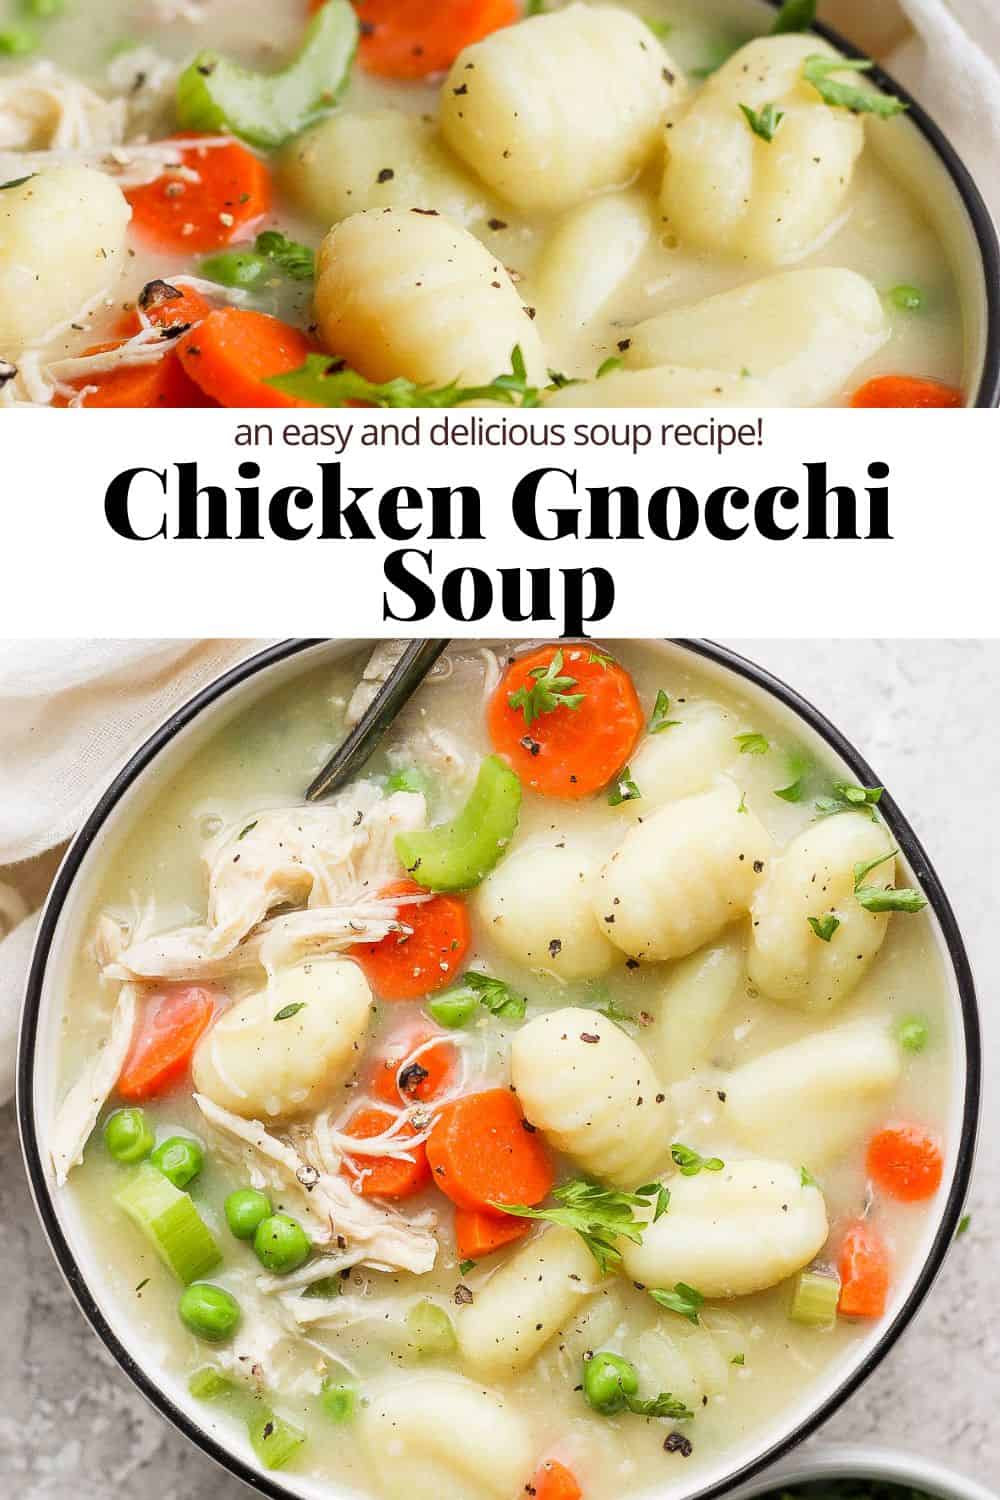 Pinterest image showing a top image of chicken gnocchi soup in a bowl, the recipe title in the middle, and an image of a bowl of chicken gnocchi soup on the bottom.